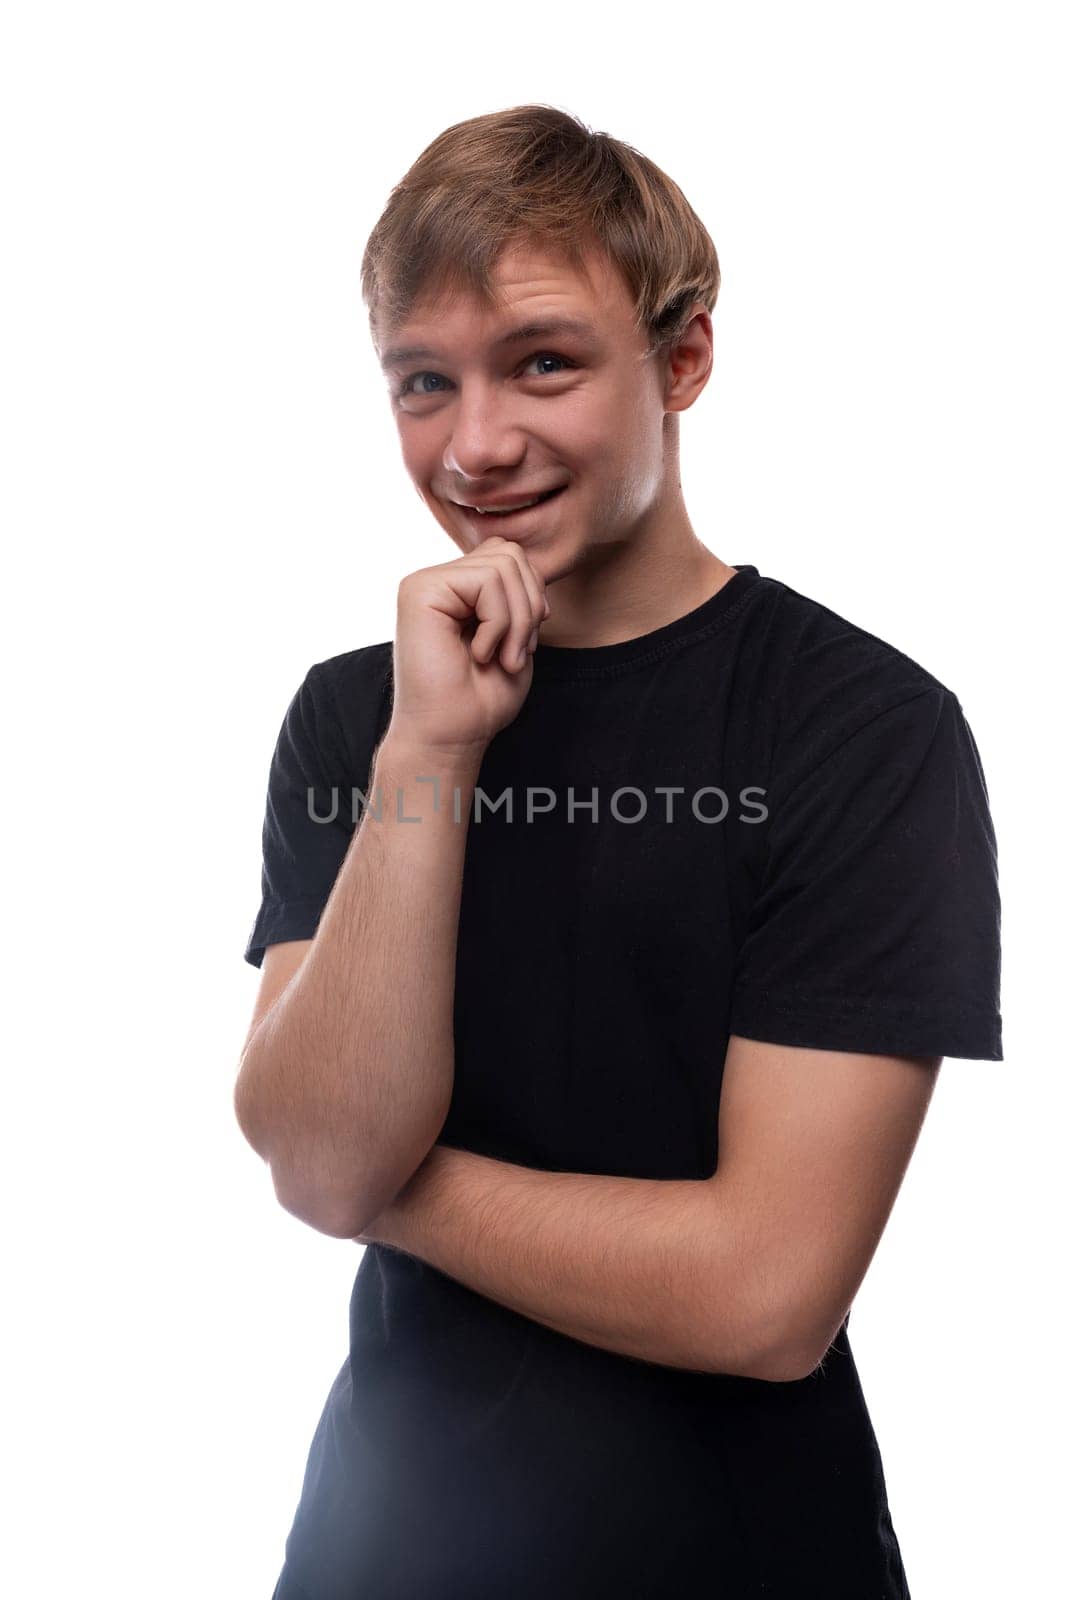 European blond teenager boy dressed in a black T-shirt smiling and happy.